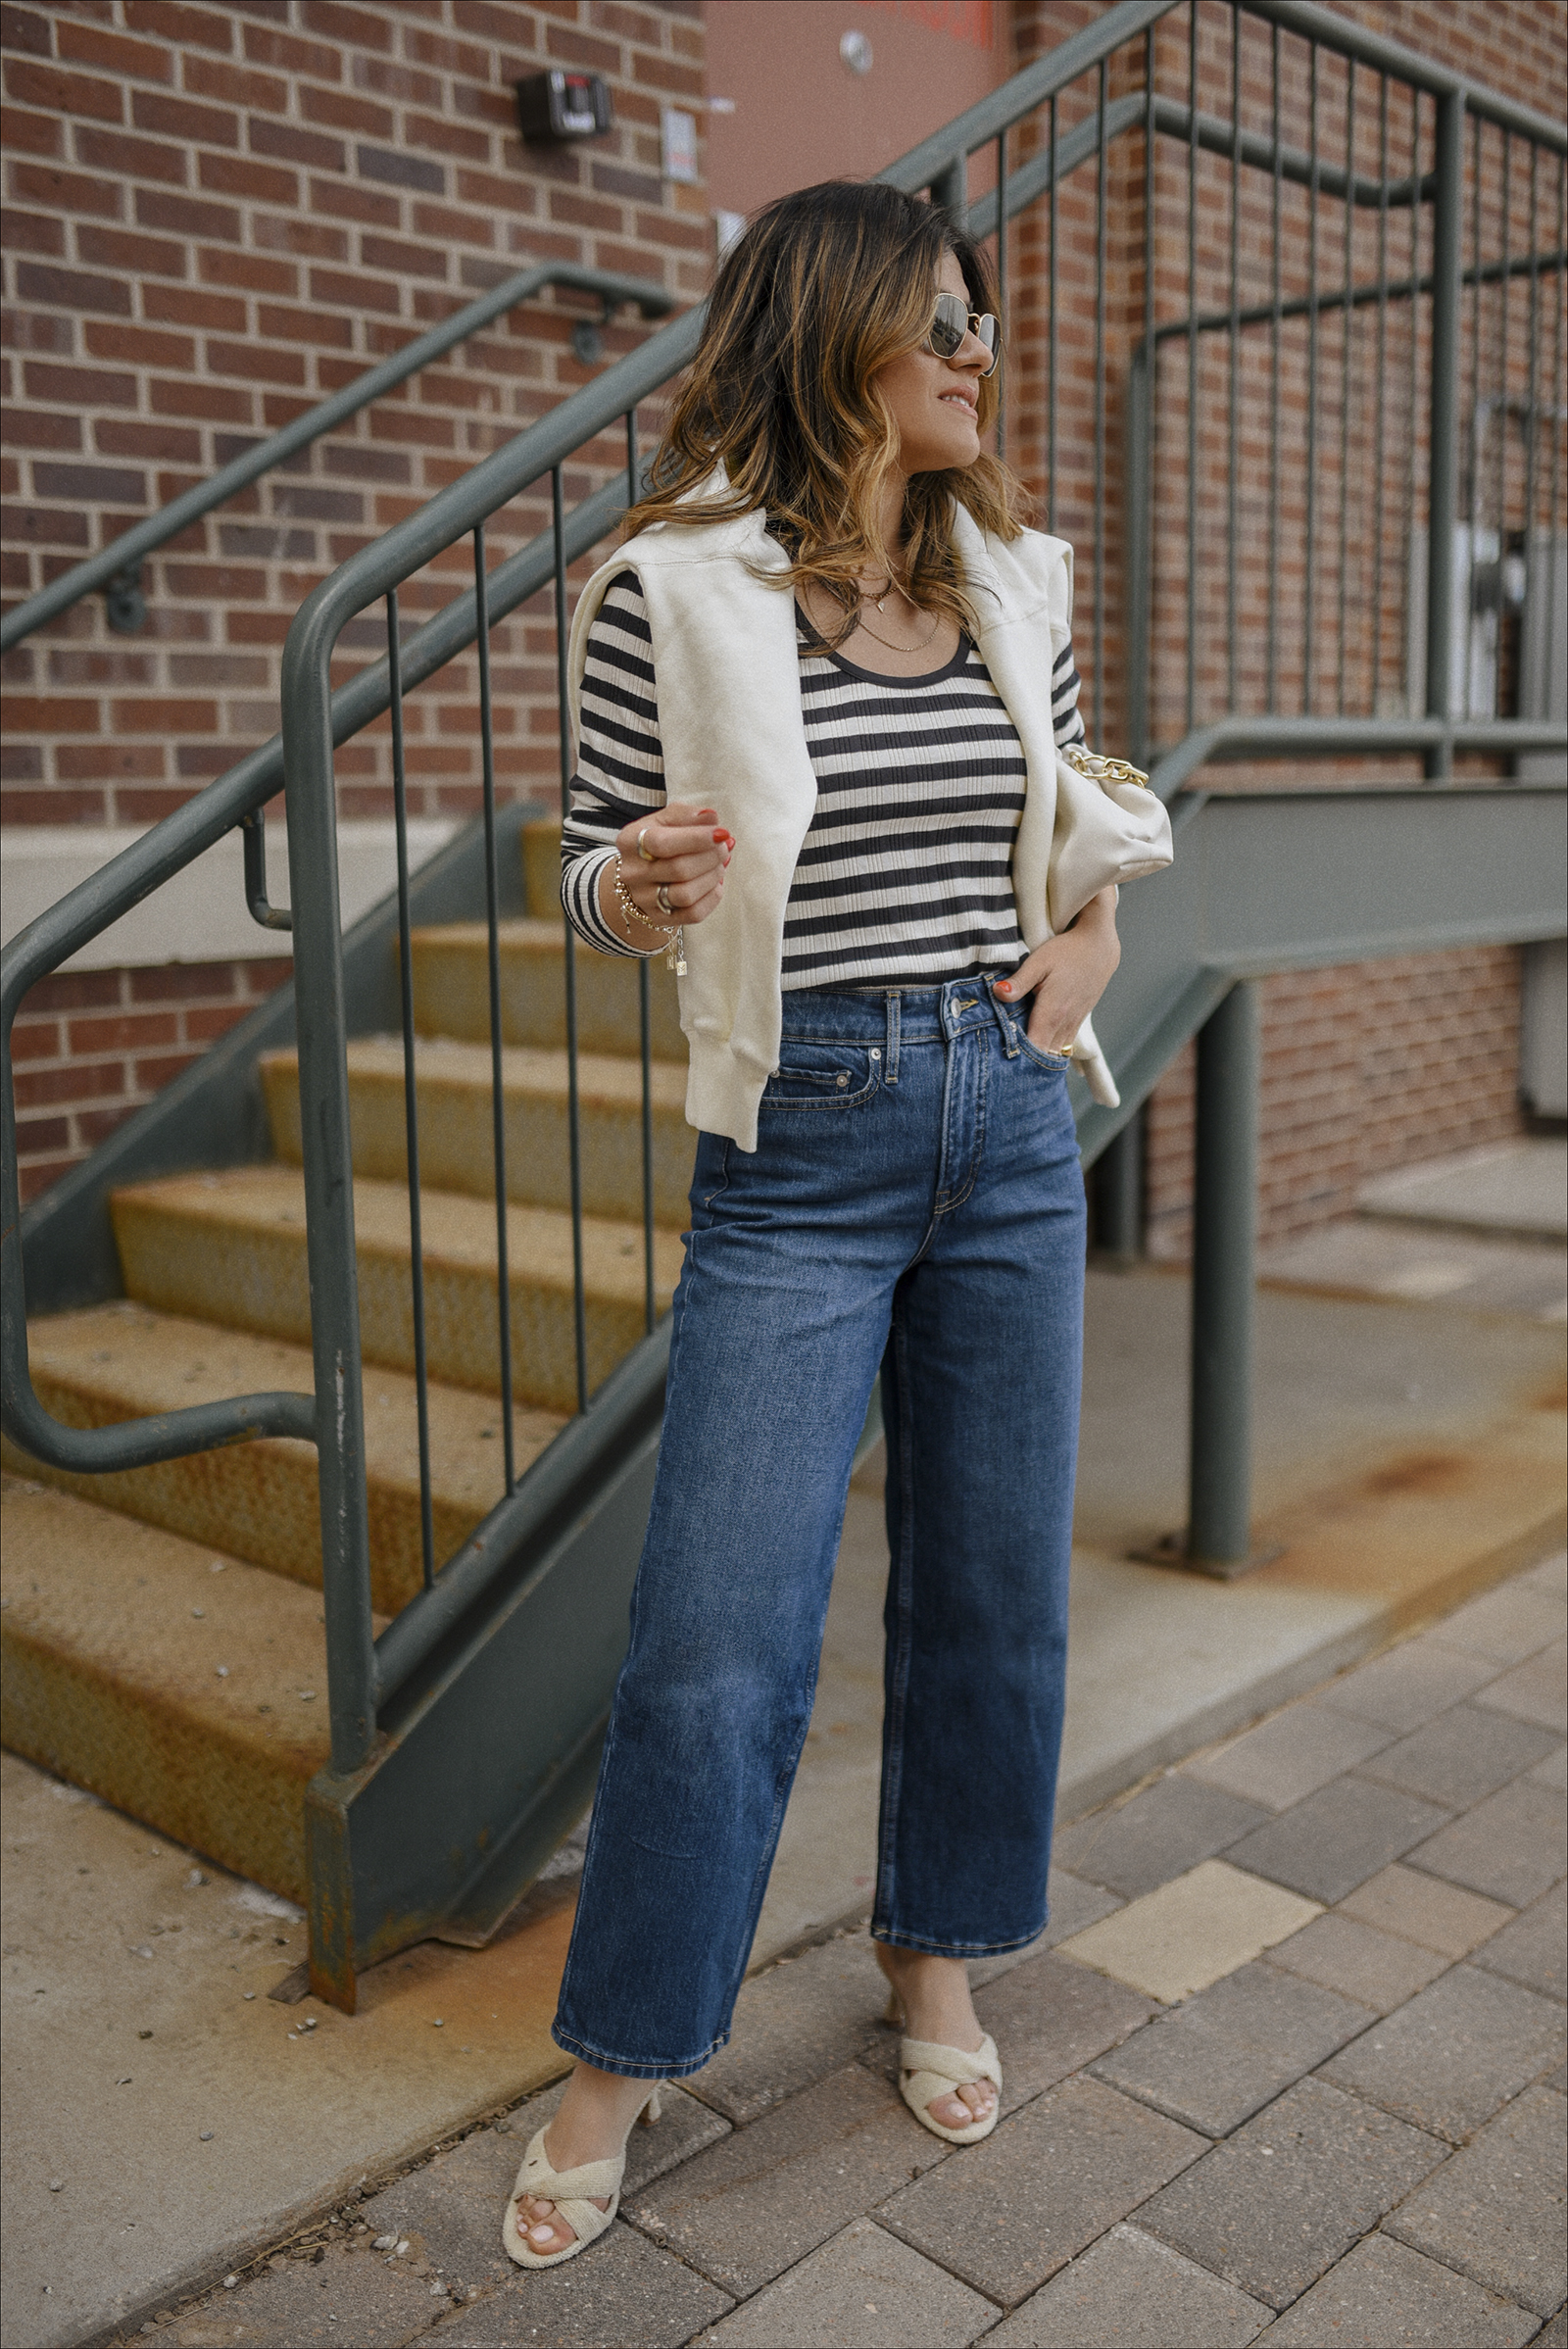 STYLING WIDE LEG JEANS FOR SPRING, CHIC TALK